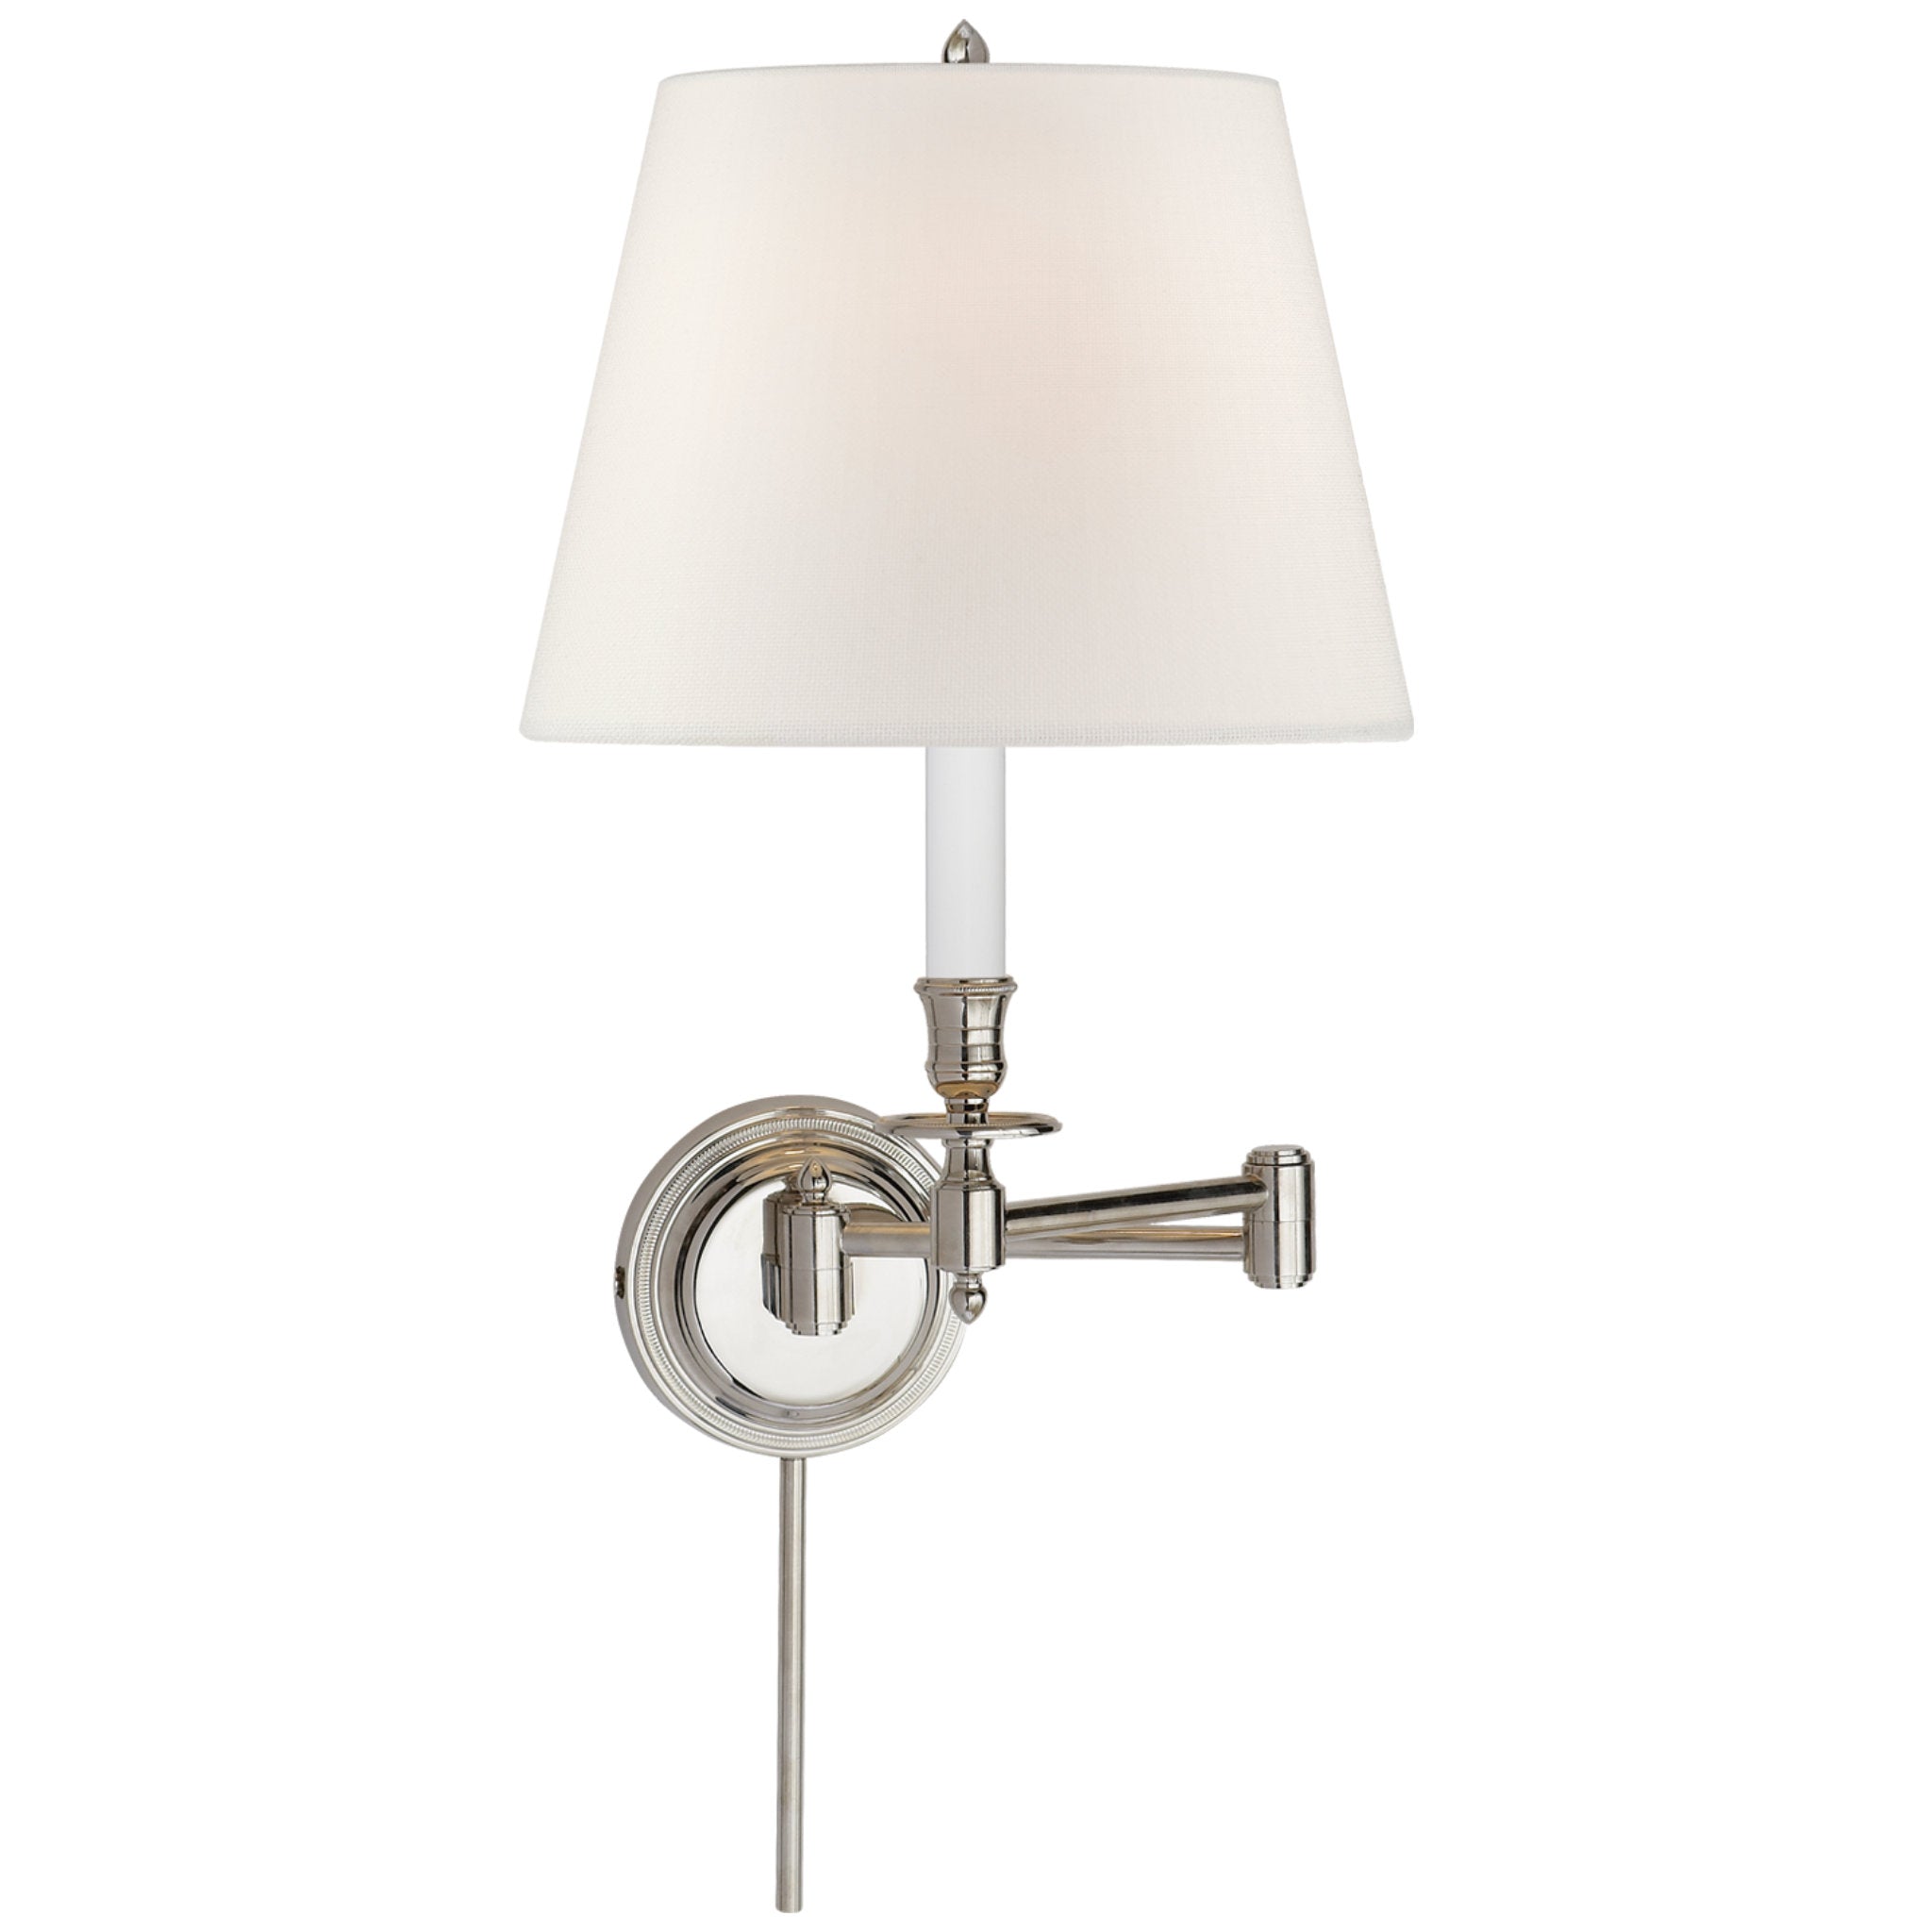 Visual Comfort Candlestick Swing Arm in Polished Nickel with Linen Shade